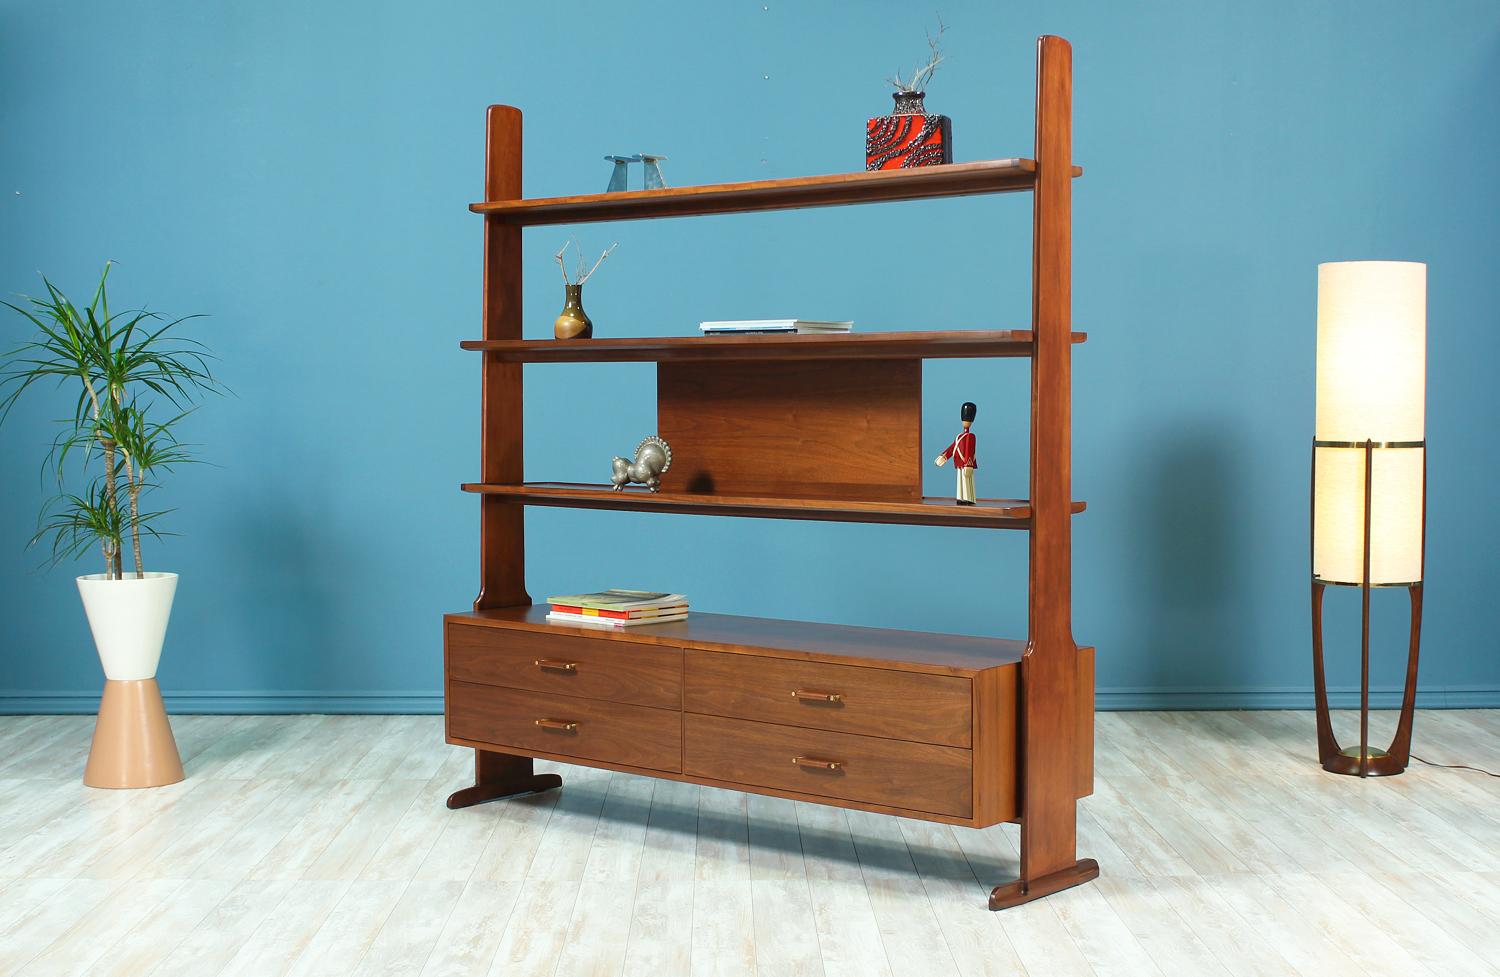 Designer: Unknown
Manufacturer: Unknown
Country of origin: United States
Date of manufacture: 1950-1959
Materials: Walnut wood
Period style: Mid-Century Modern

Condition: Excellent
Extra conditions: Newly refinished
Dimensions: in H x in W